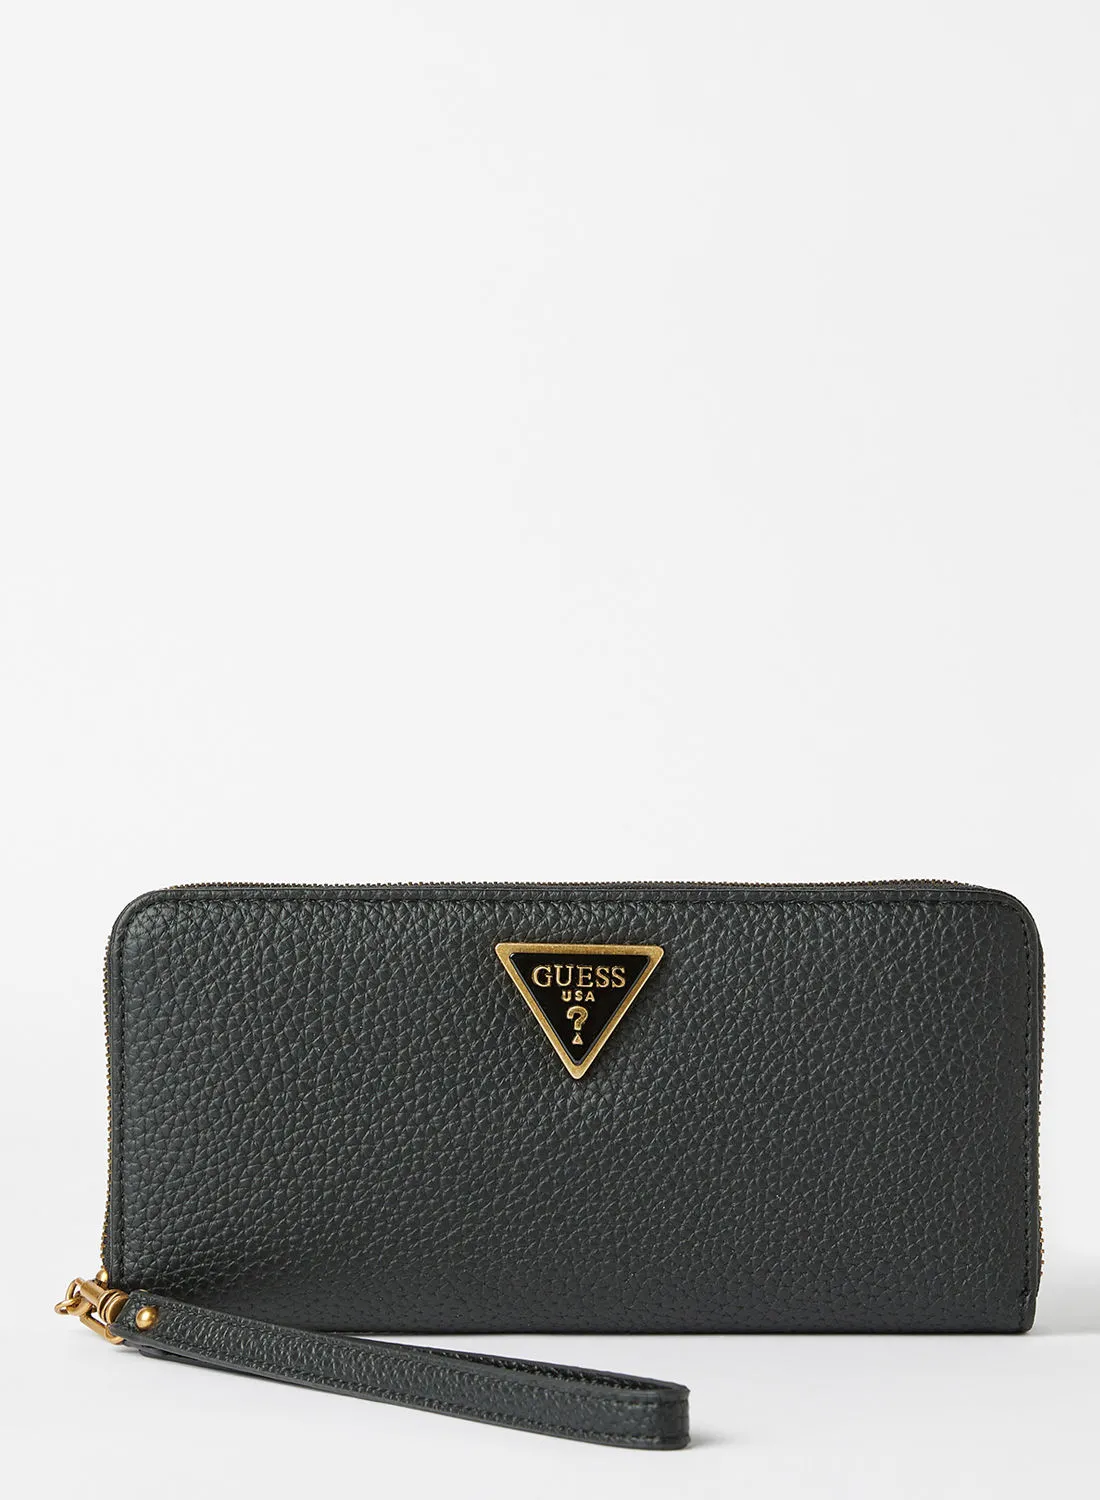 GUESS Downtown Chic Zip Around Wallet Black